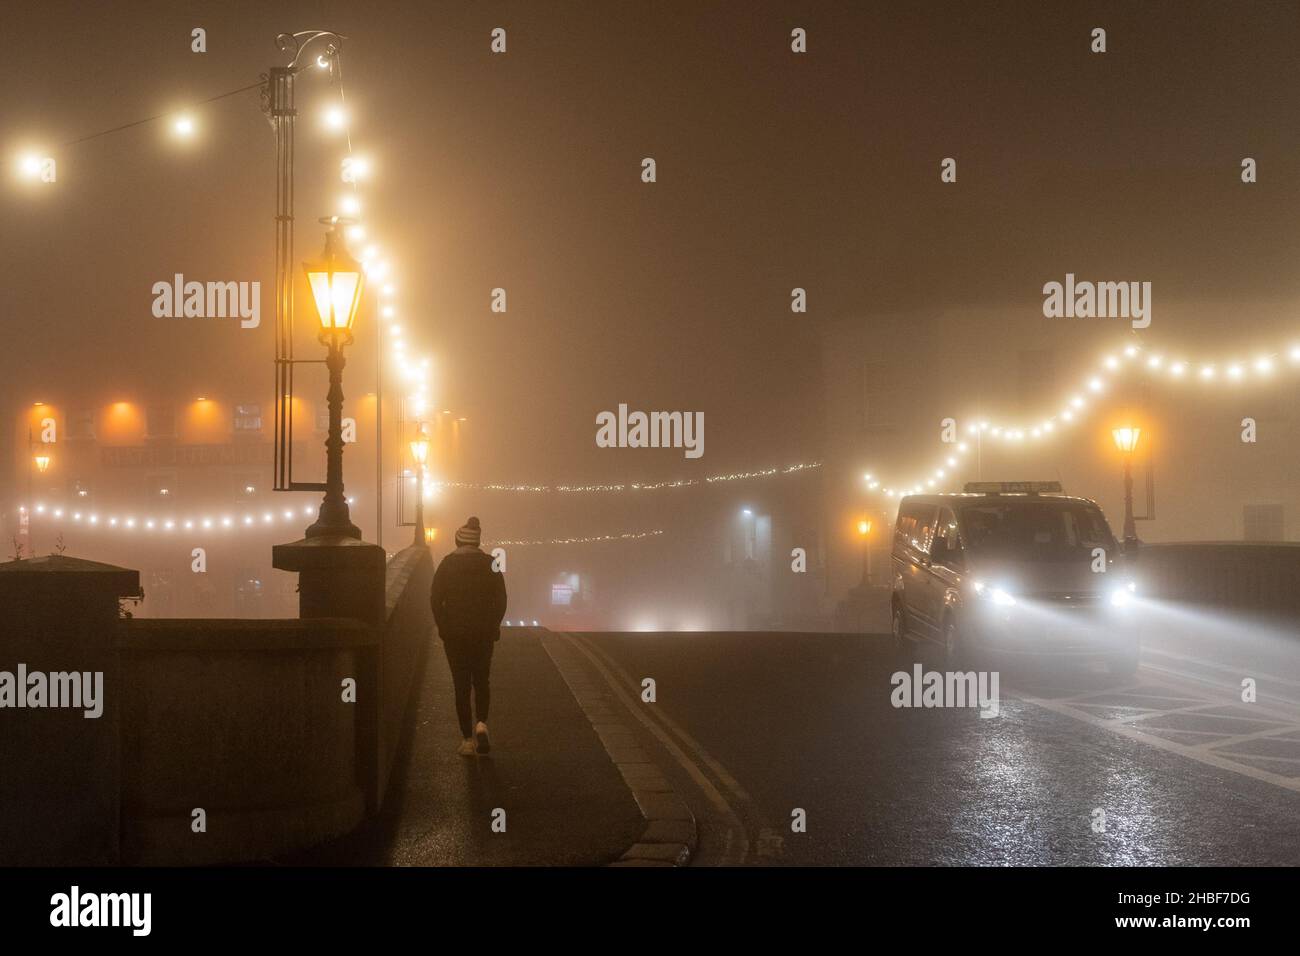 Kilkenny, Co. Kilkenny, Ireland. 19th Dec, 2021. A heavy fog enveloped Kilkenny this evening on the eve of new COVID-19 restrictions. Pubs and restaurants must close at 8pm from tomorrow night until 31st January. Credit: AG News/Alamy Live News Stock Photo